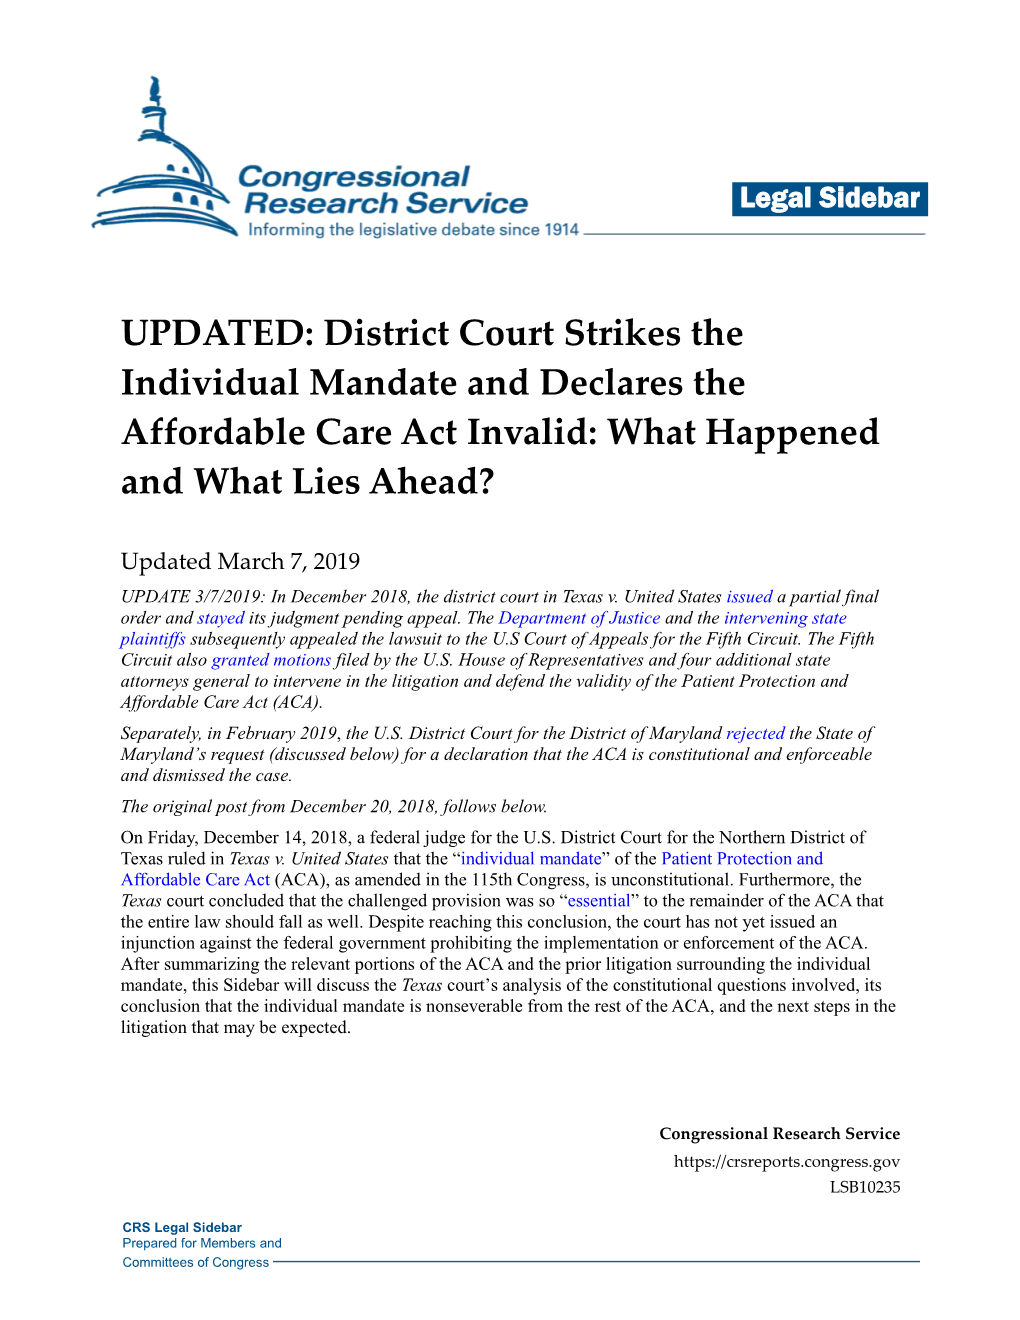 UPDATED: District Court Strikes the Individual Mandate and Declares the Affordable Care Act Invalid: What Happened and What Lies Ahead?